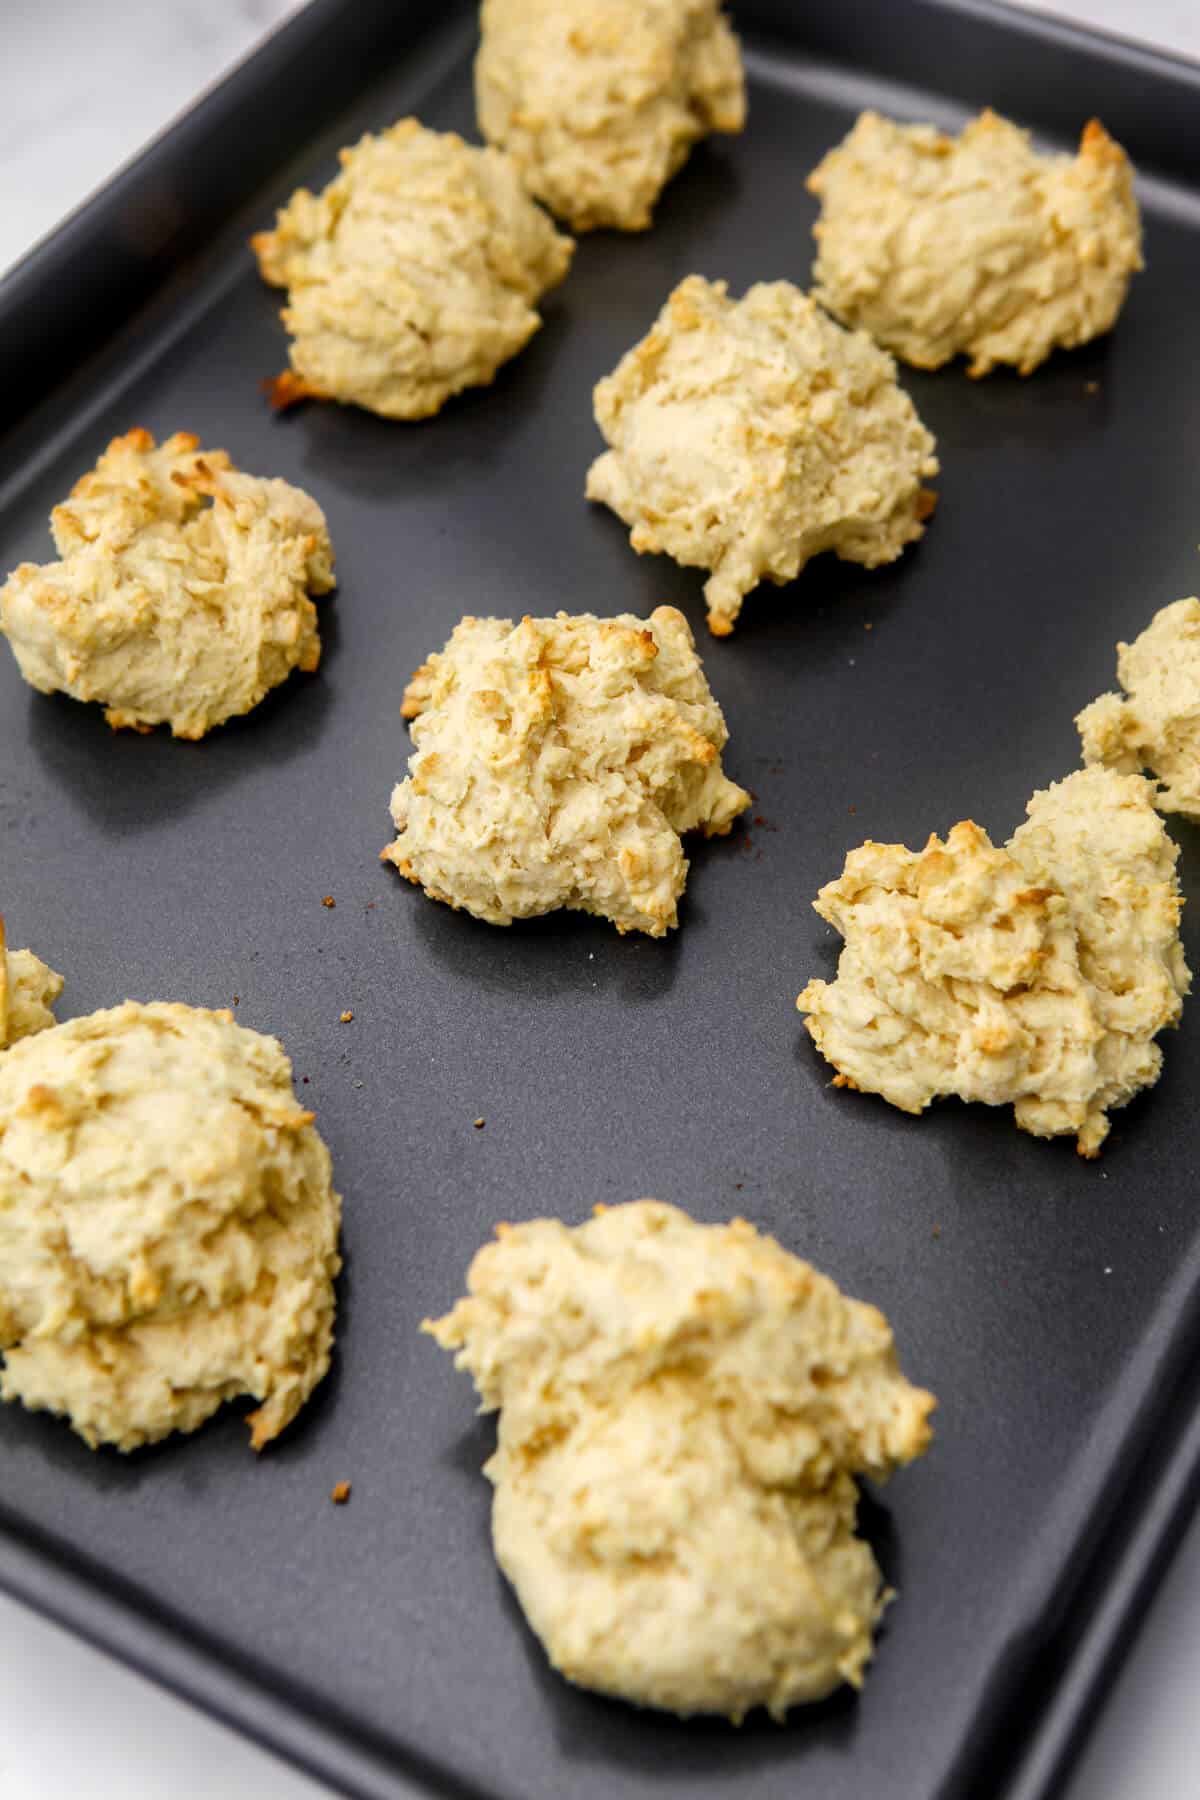 Vegan drop biscuits on a baking tray after they have been baked.